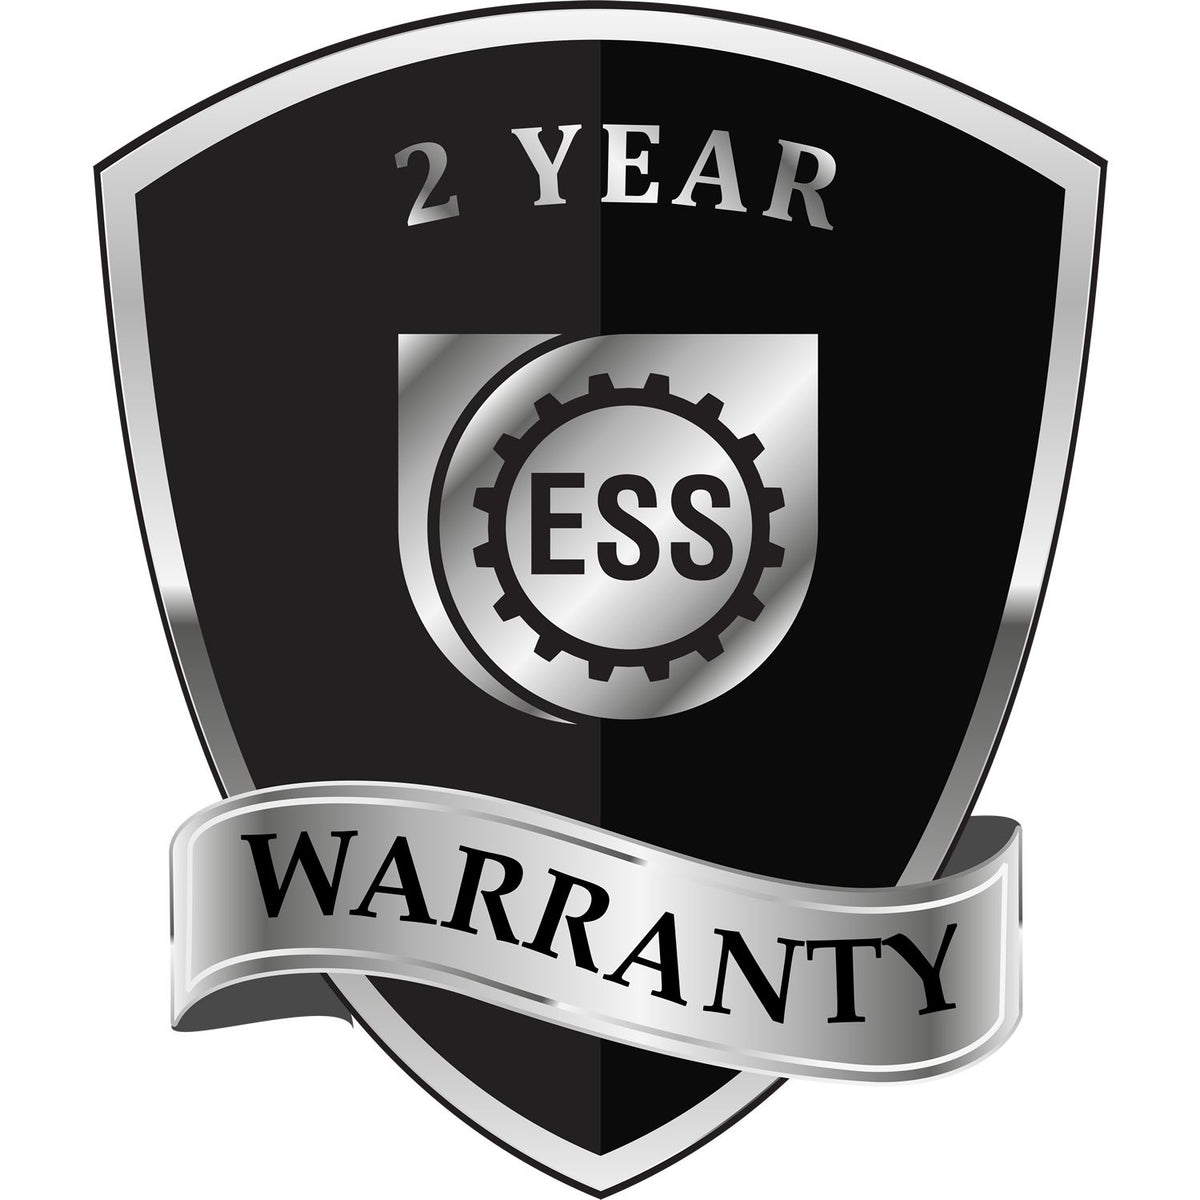 A badge or emblem showing a warranty icon for the Extended Long Reach Illinois Architect Seal Embosser